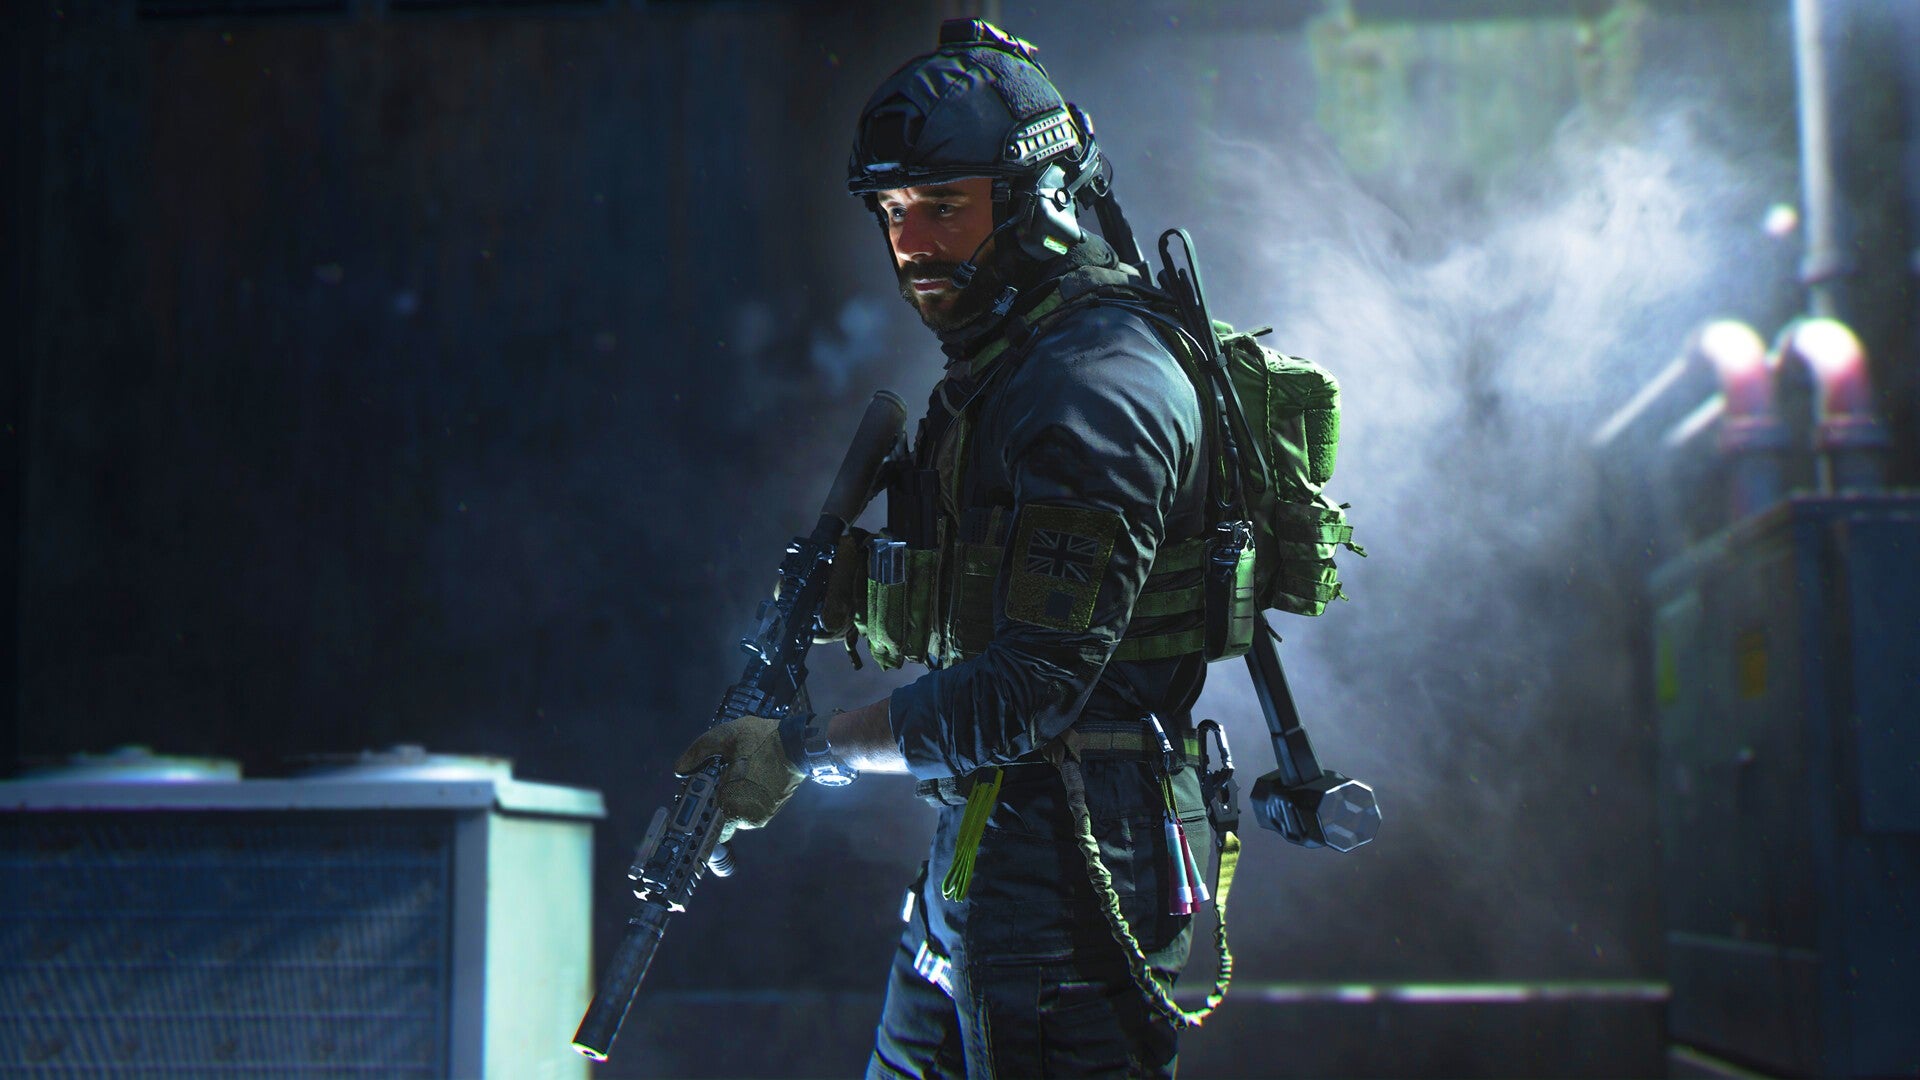 Modern Warfare 2 image showing Captain Price standing in a smoky room while holding an assault rifle.